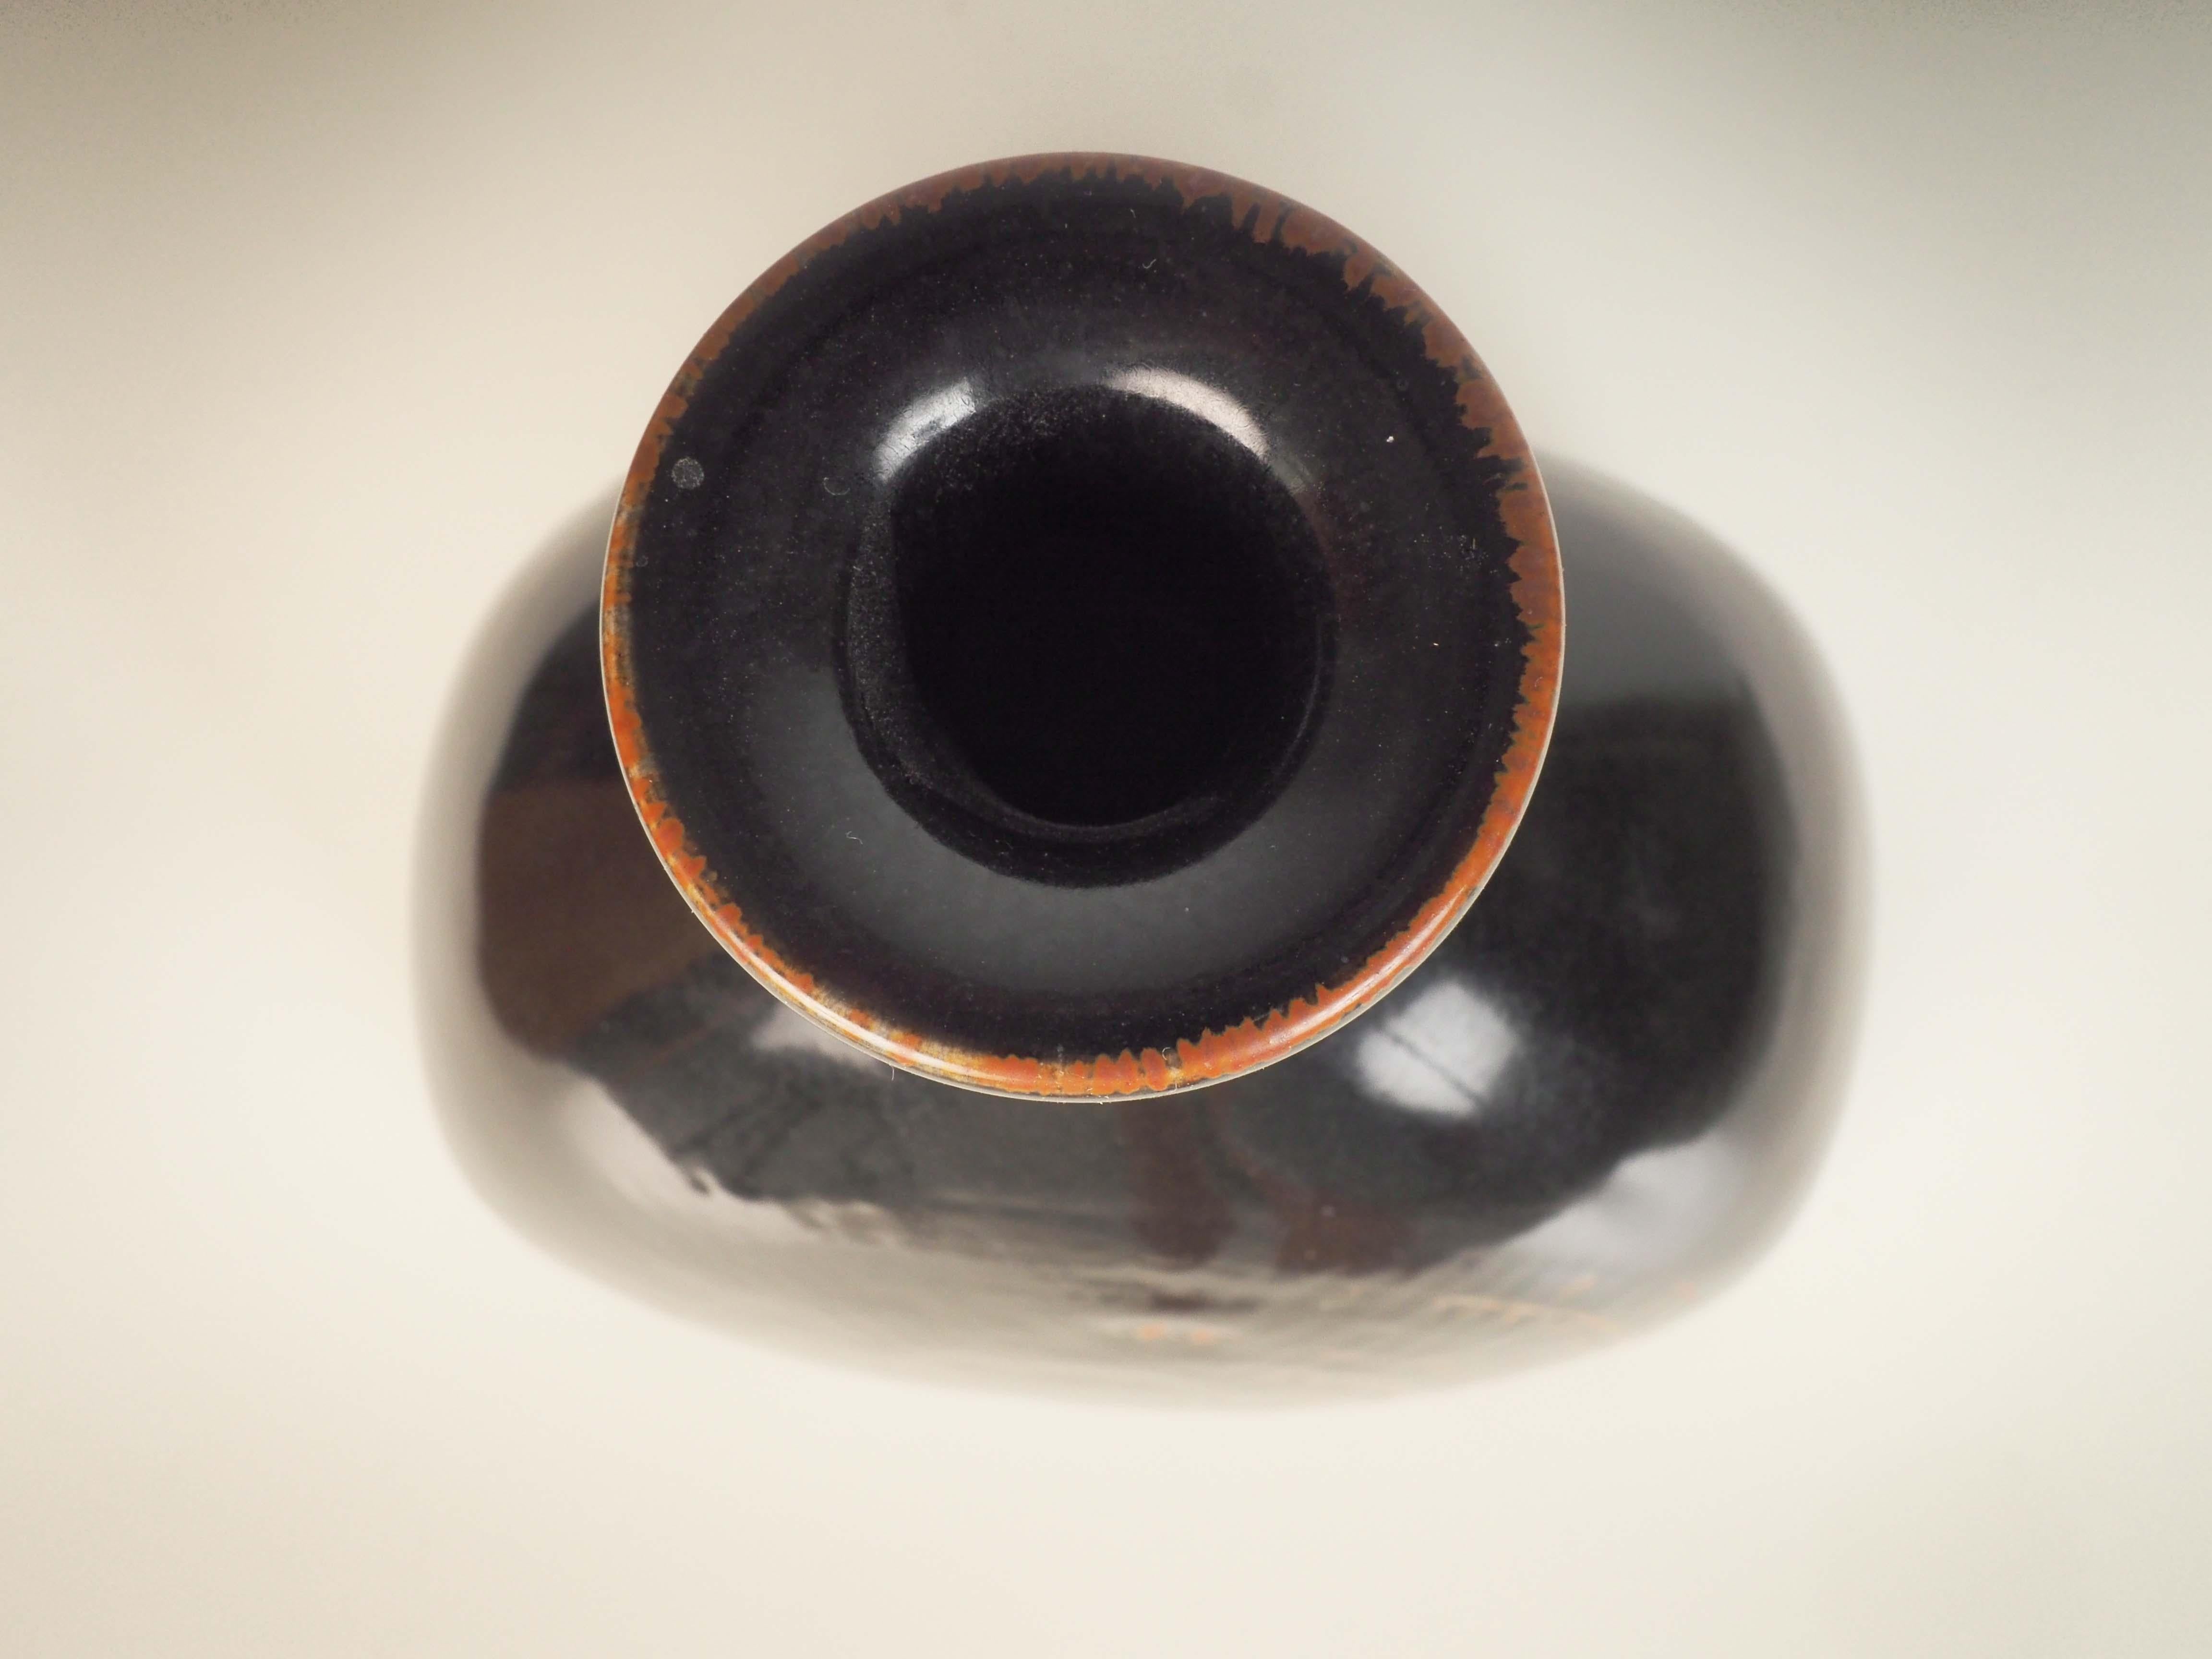 Vase in stoneware designed by Stig Lindberg at Gustavsbergs Studio, Sweden. This piece was made in 1970.
The darker glaze is typical for Lindberg work in the late sixties and the beginning of the seventies.